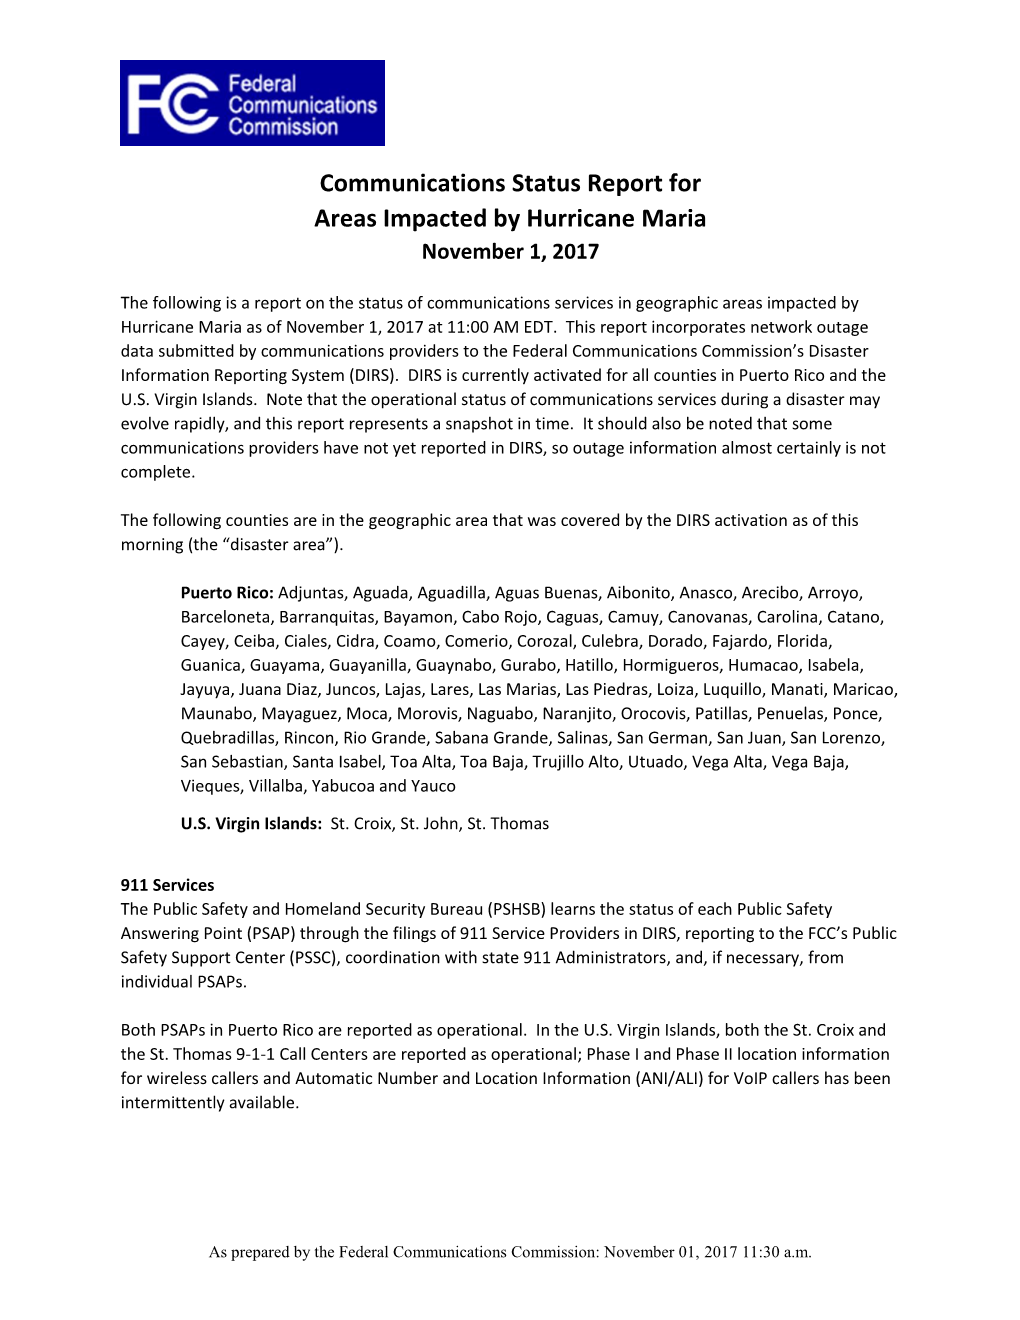 Communications Status Report for Areas Impacted by Hurricane Maria November 1, 2017